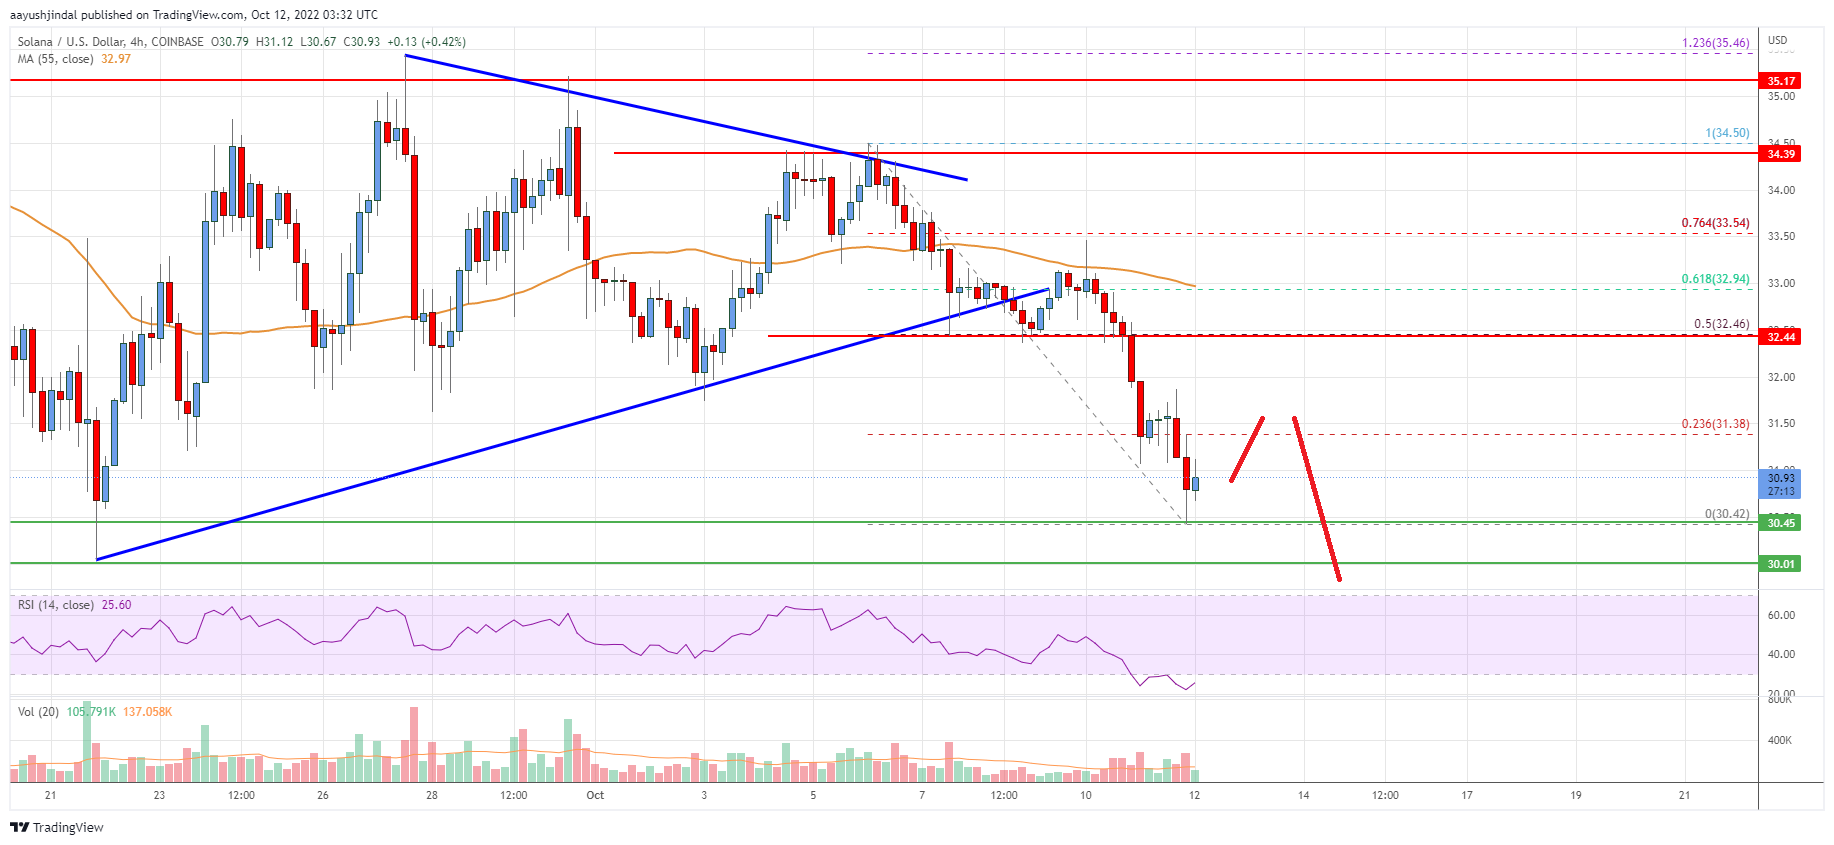 Solana (SOL) Price Analysis: Can Bears Break This Uptrend Support?